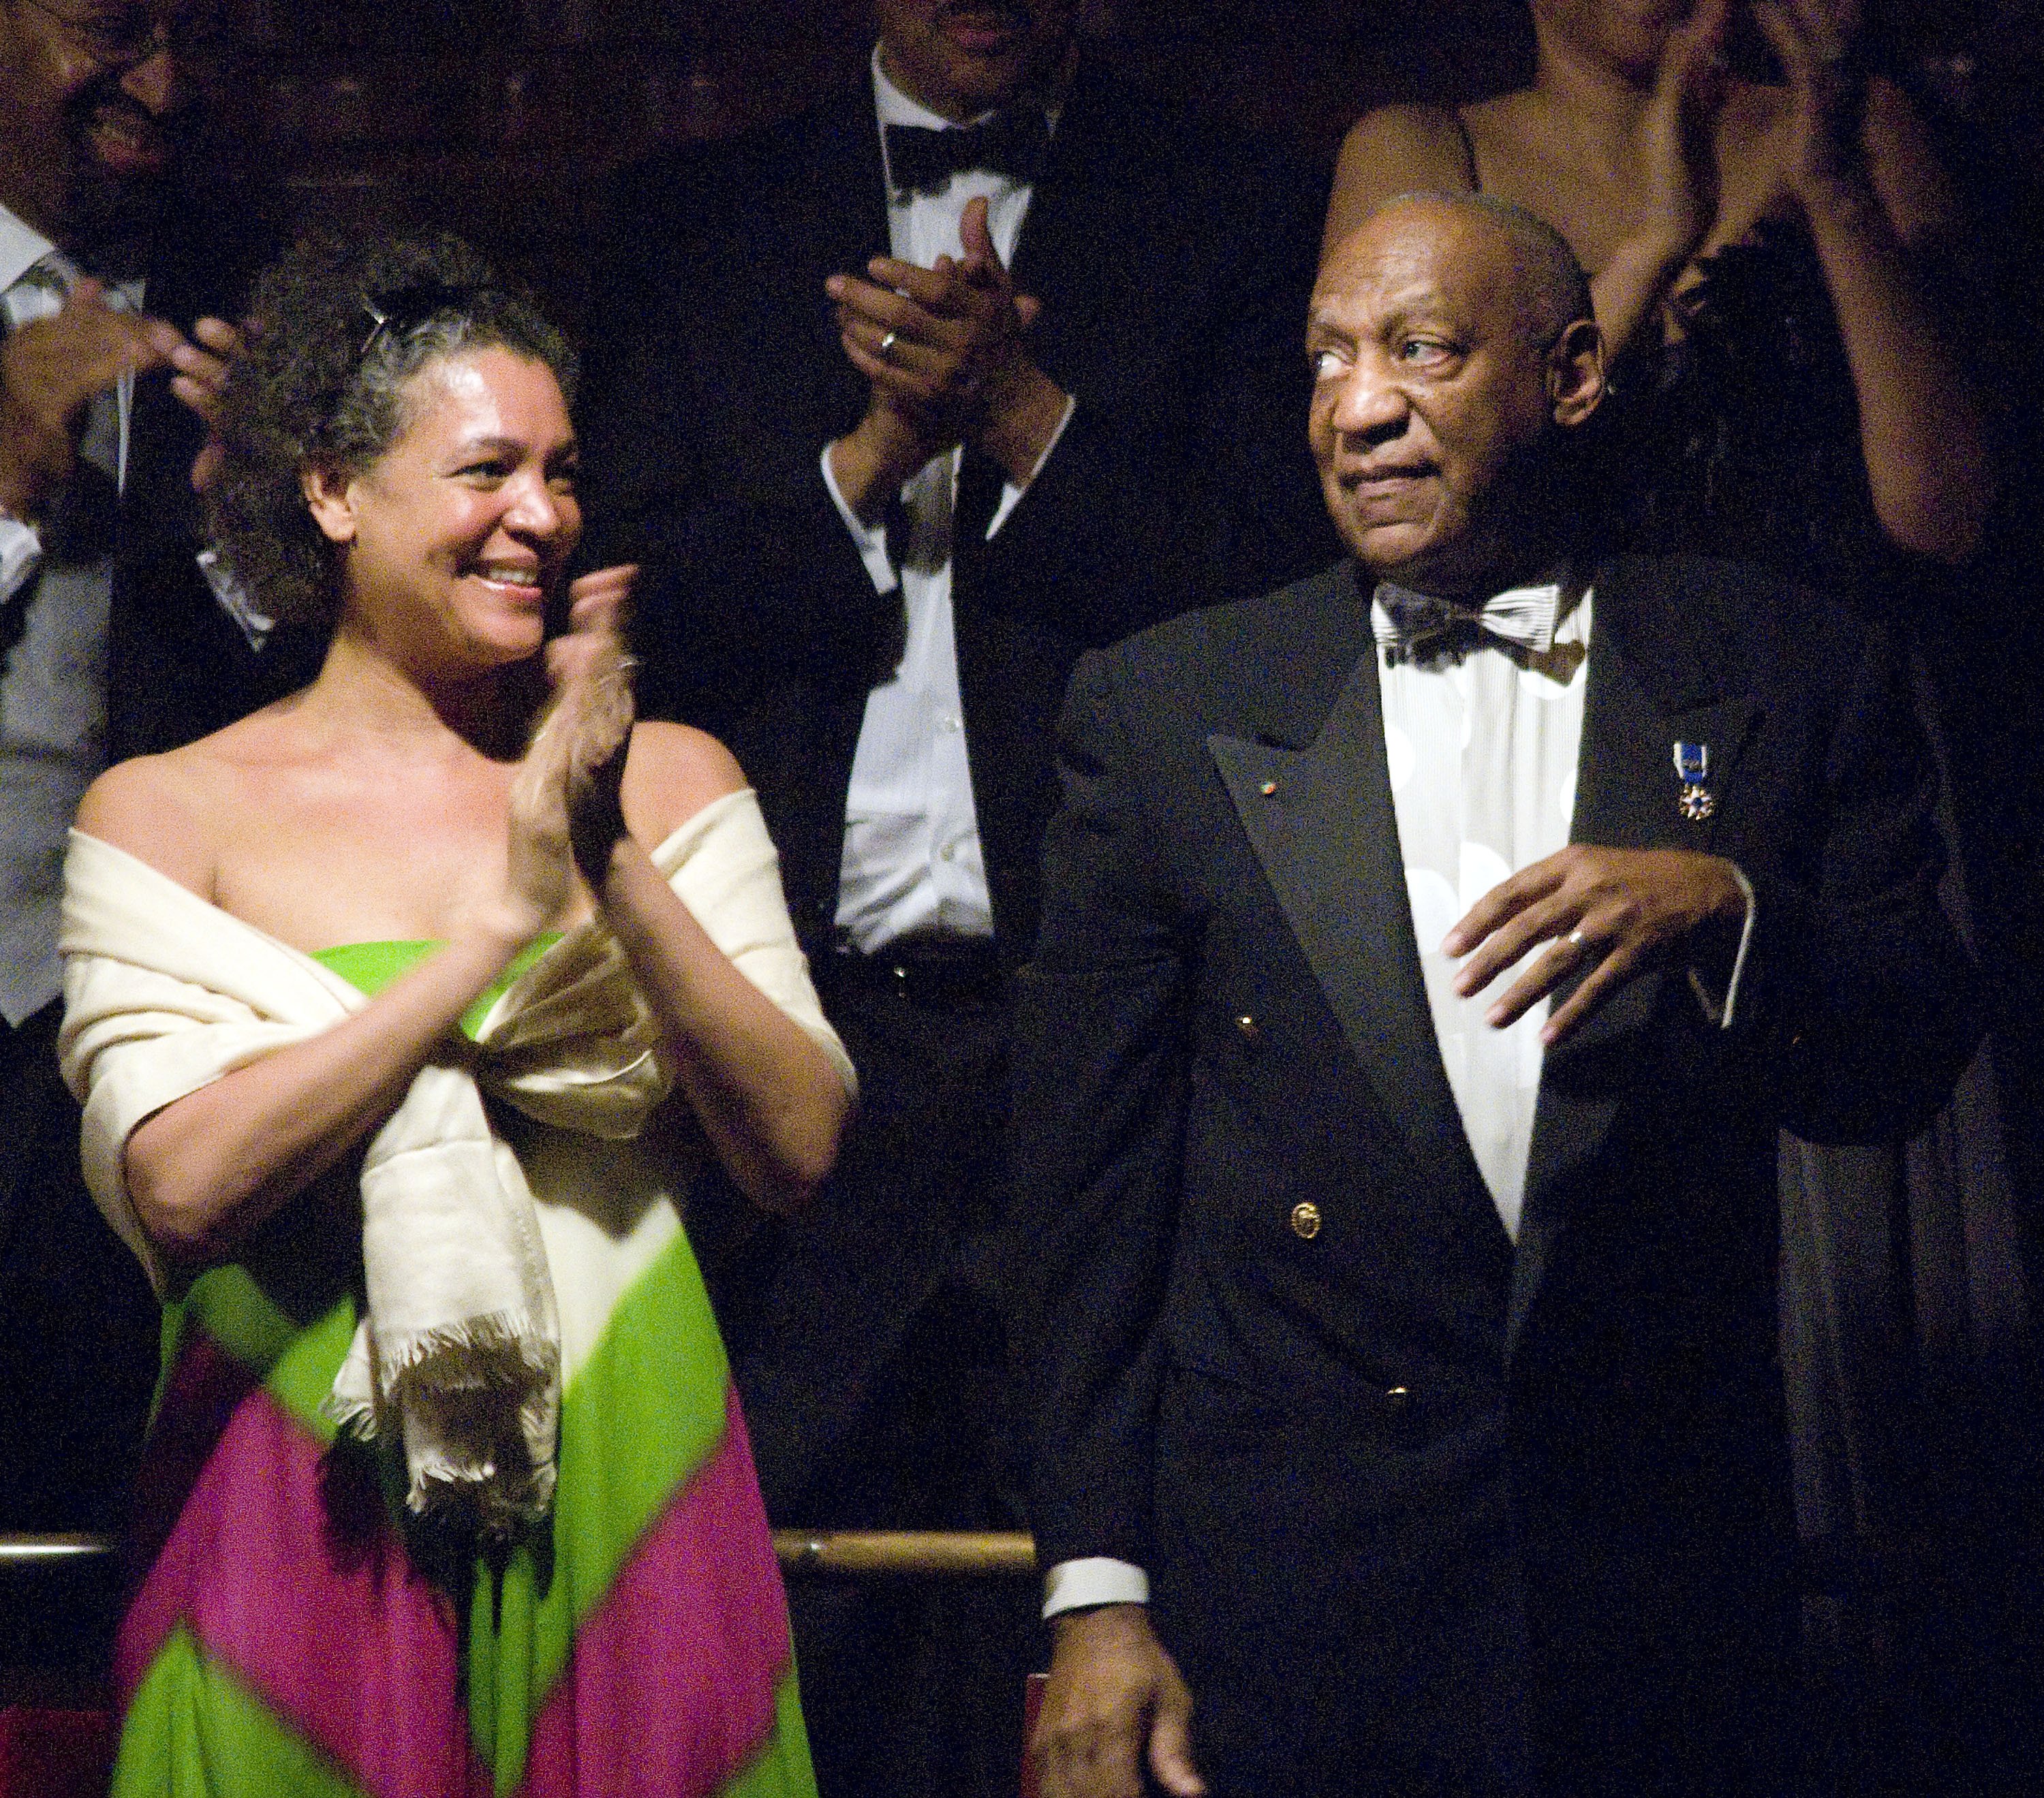  Bill Cosby and Erin Cosby at The Kimmel Center for the Performing Arts in Philadelphia, Pennsylvania on April 6, 2010 | Source: Getty Images